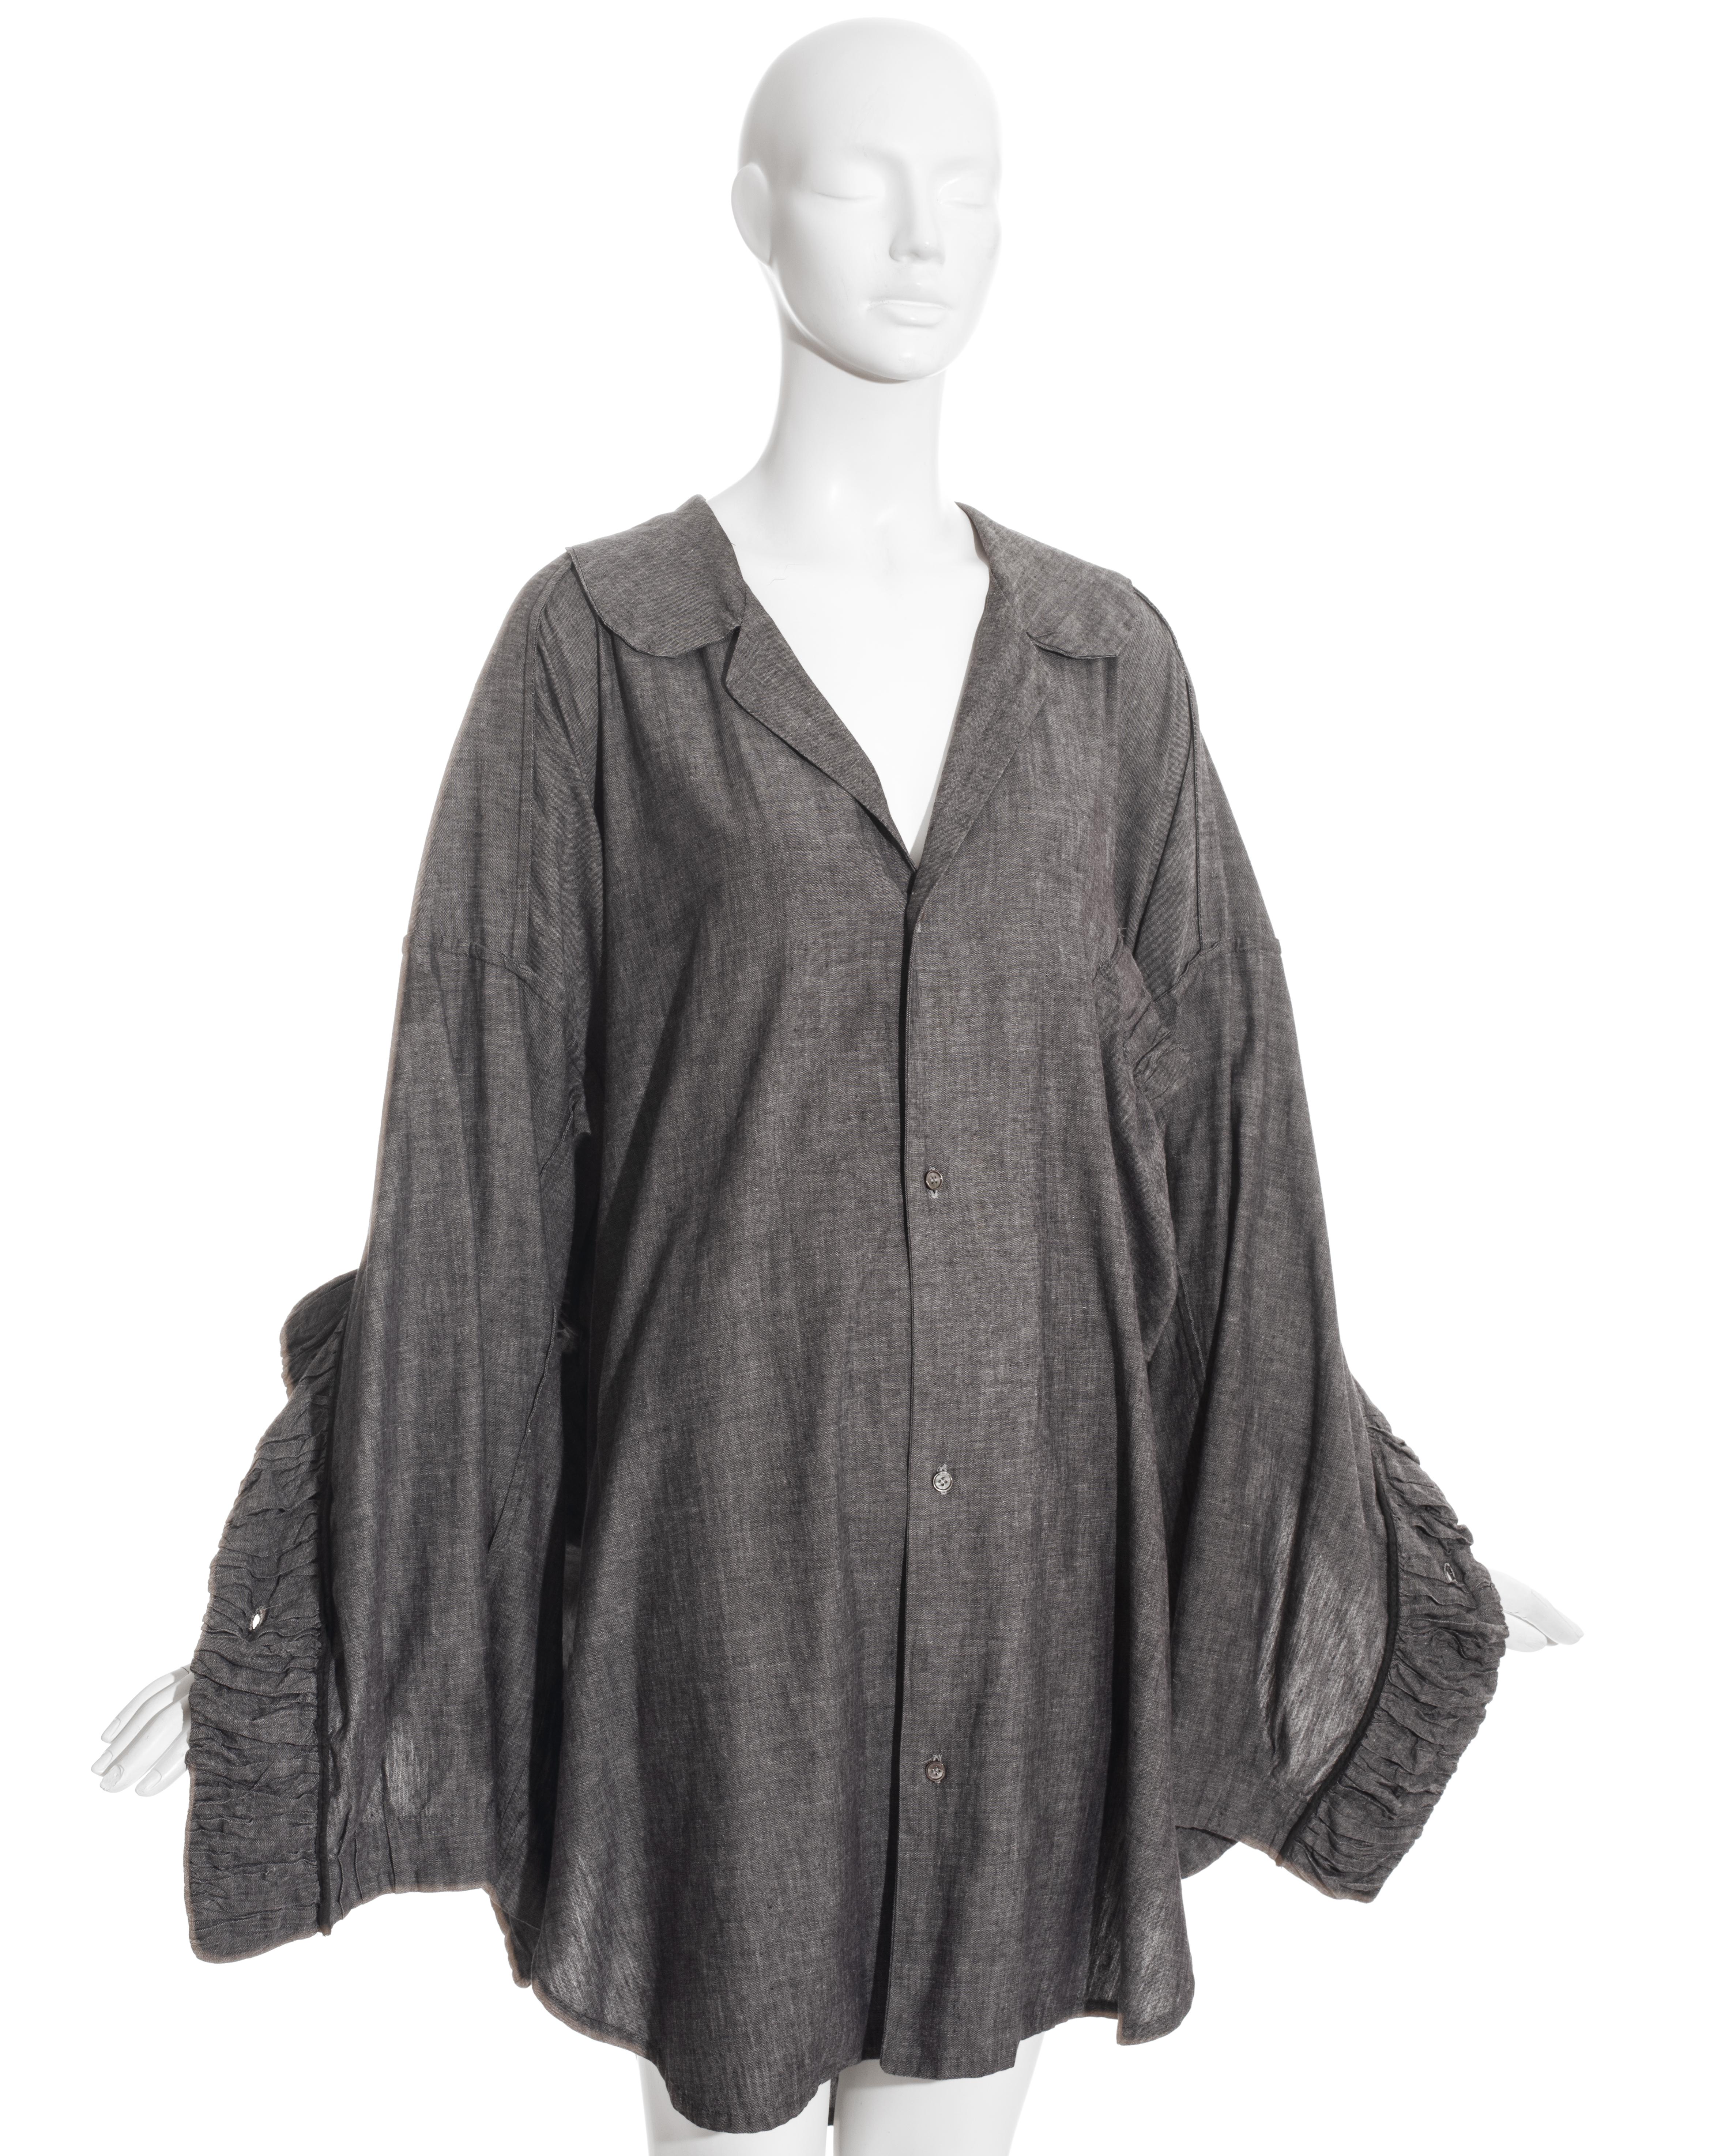 John Galliano grey linen oversized button-up shirt with ruffled trim on cuffs and pocket.

Afghanistan Repudiates Western Ideals, Spring-Summer 1985